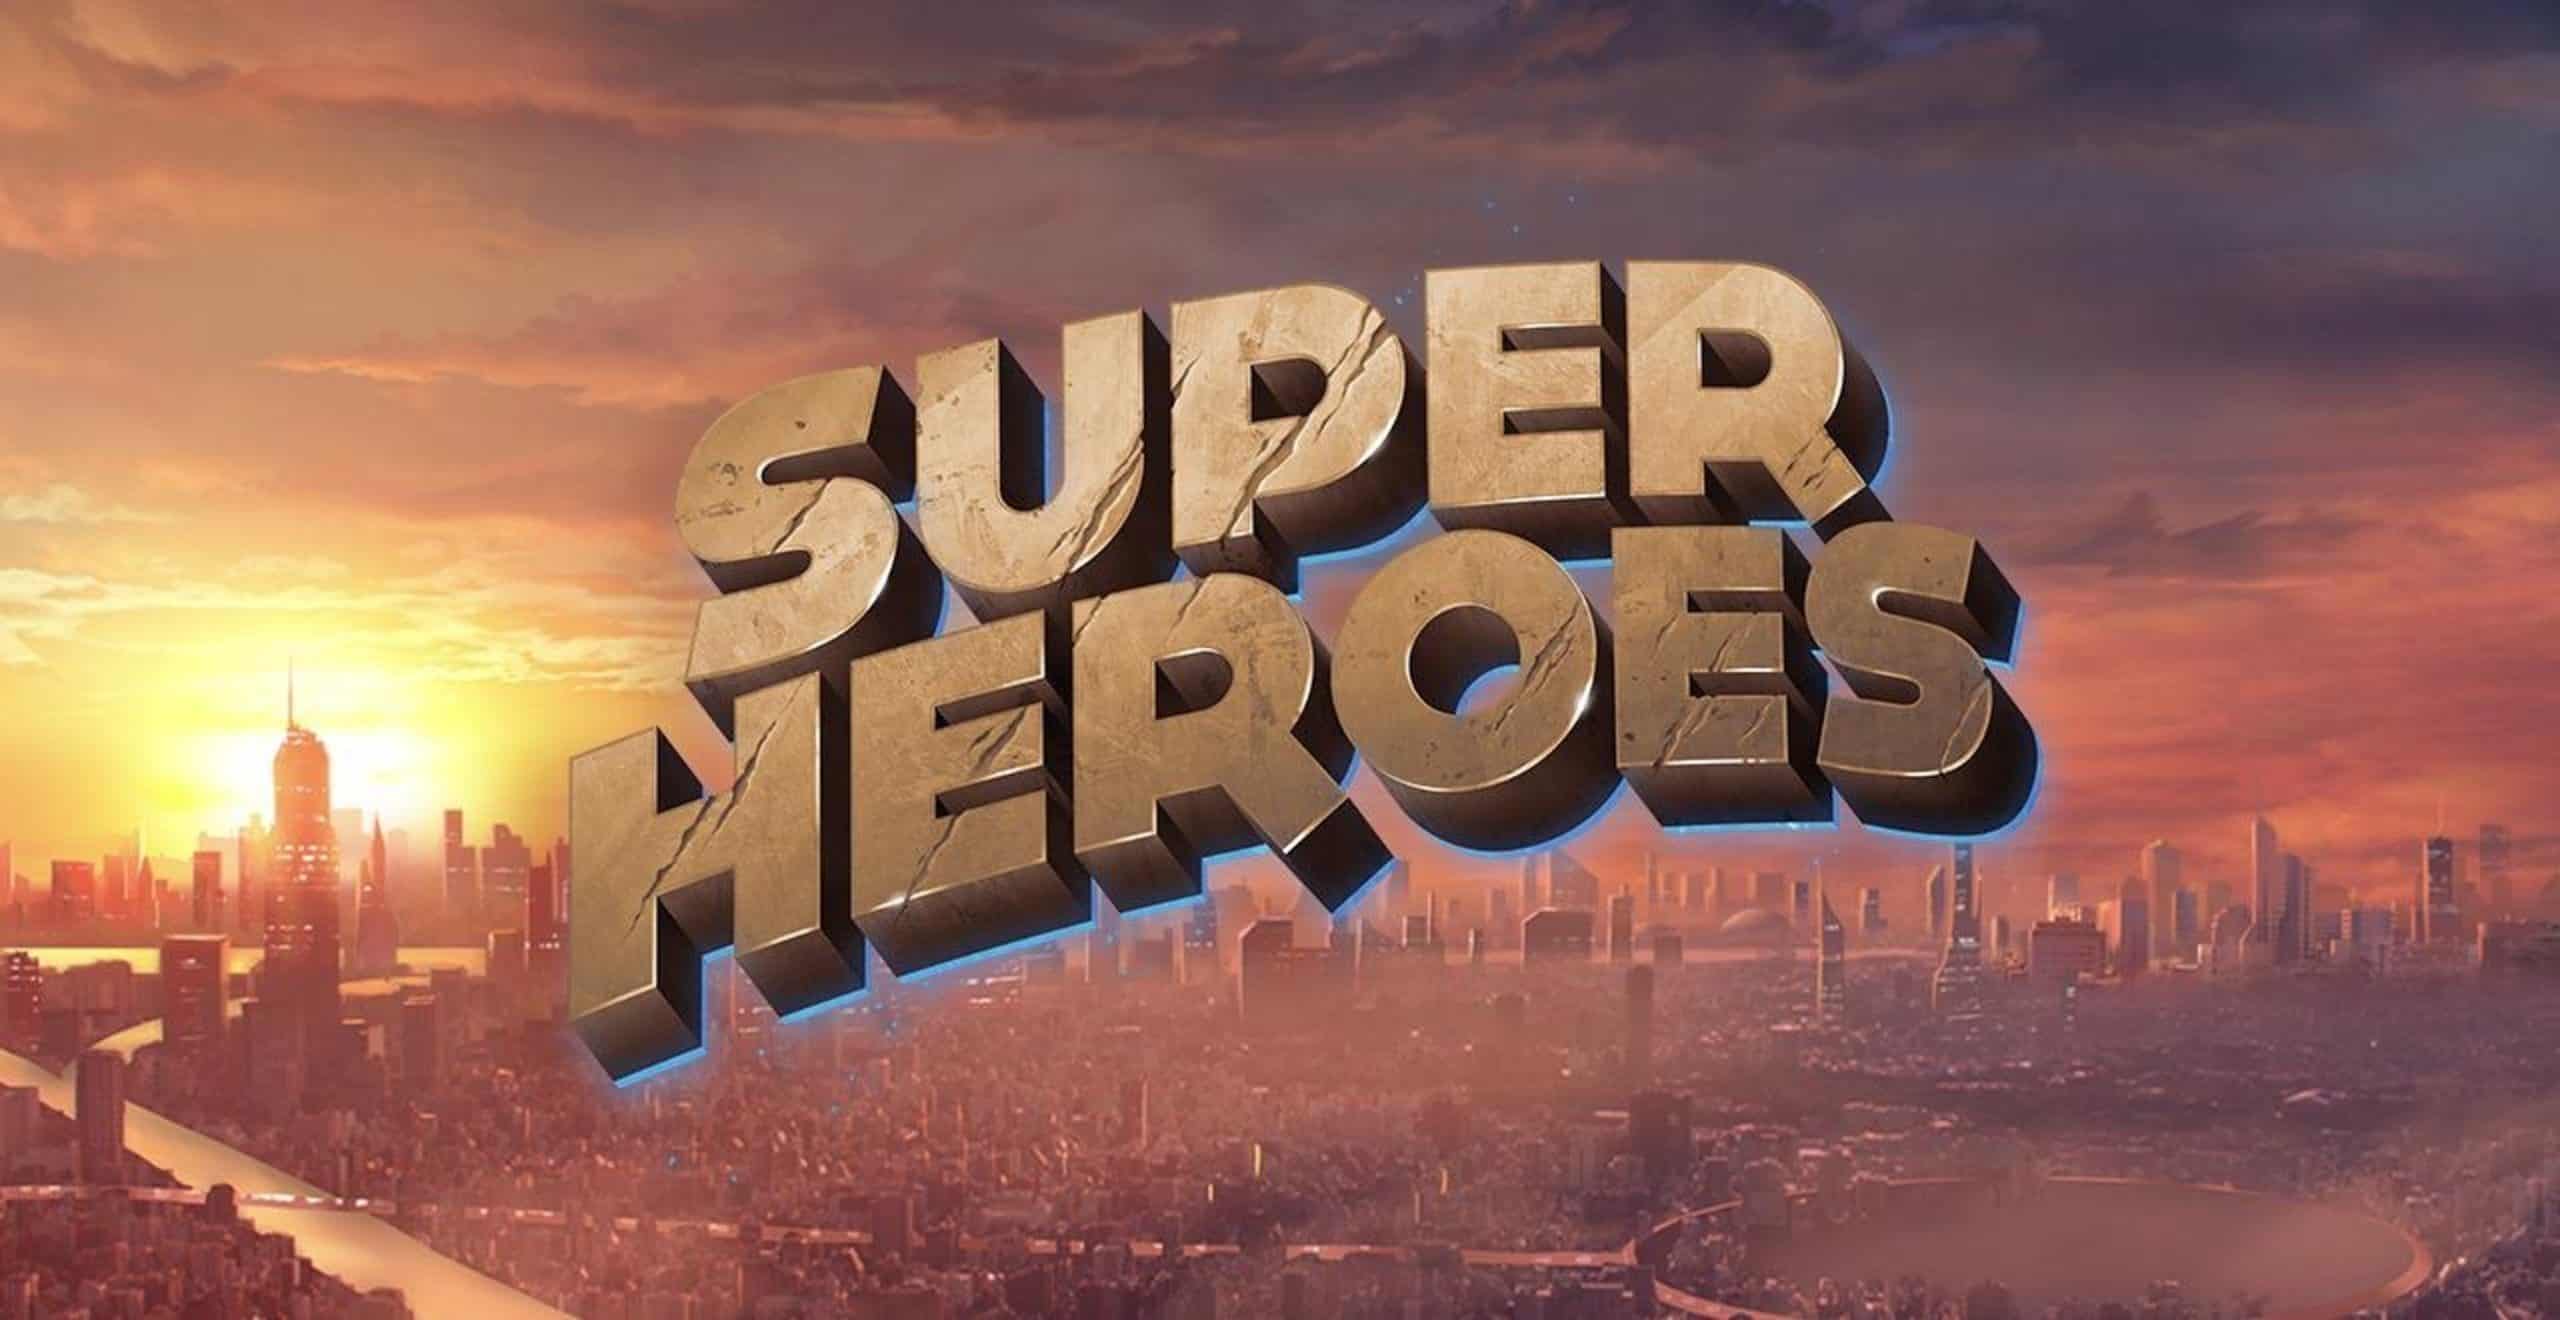 Super Heroes slot cover image